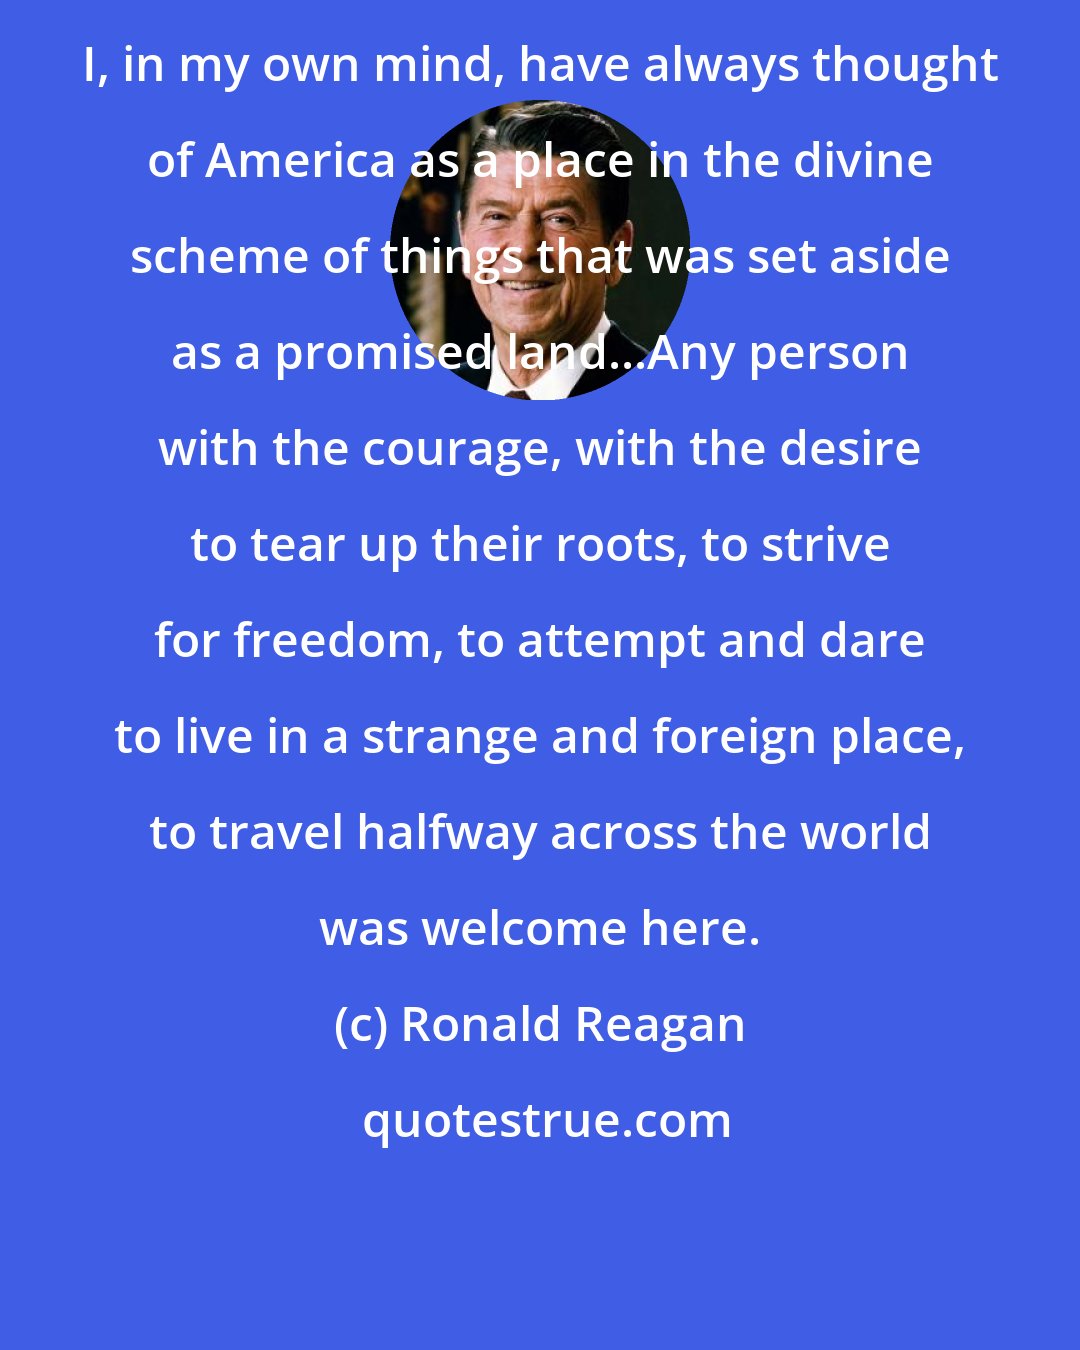 Ronald Reagan: I, in my own mind, have always thought of America as a place in the divine scheme of things that was set aside as a promised land...Any person with the courage, with the desire to tear up their roots, to strive for freedom, to attempt and dare to live in a strange and foreign place, to travel halfway across the world was welcome here.